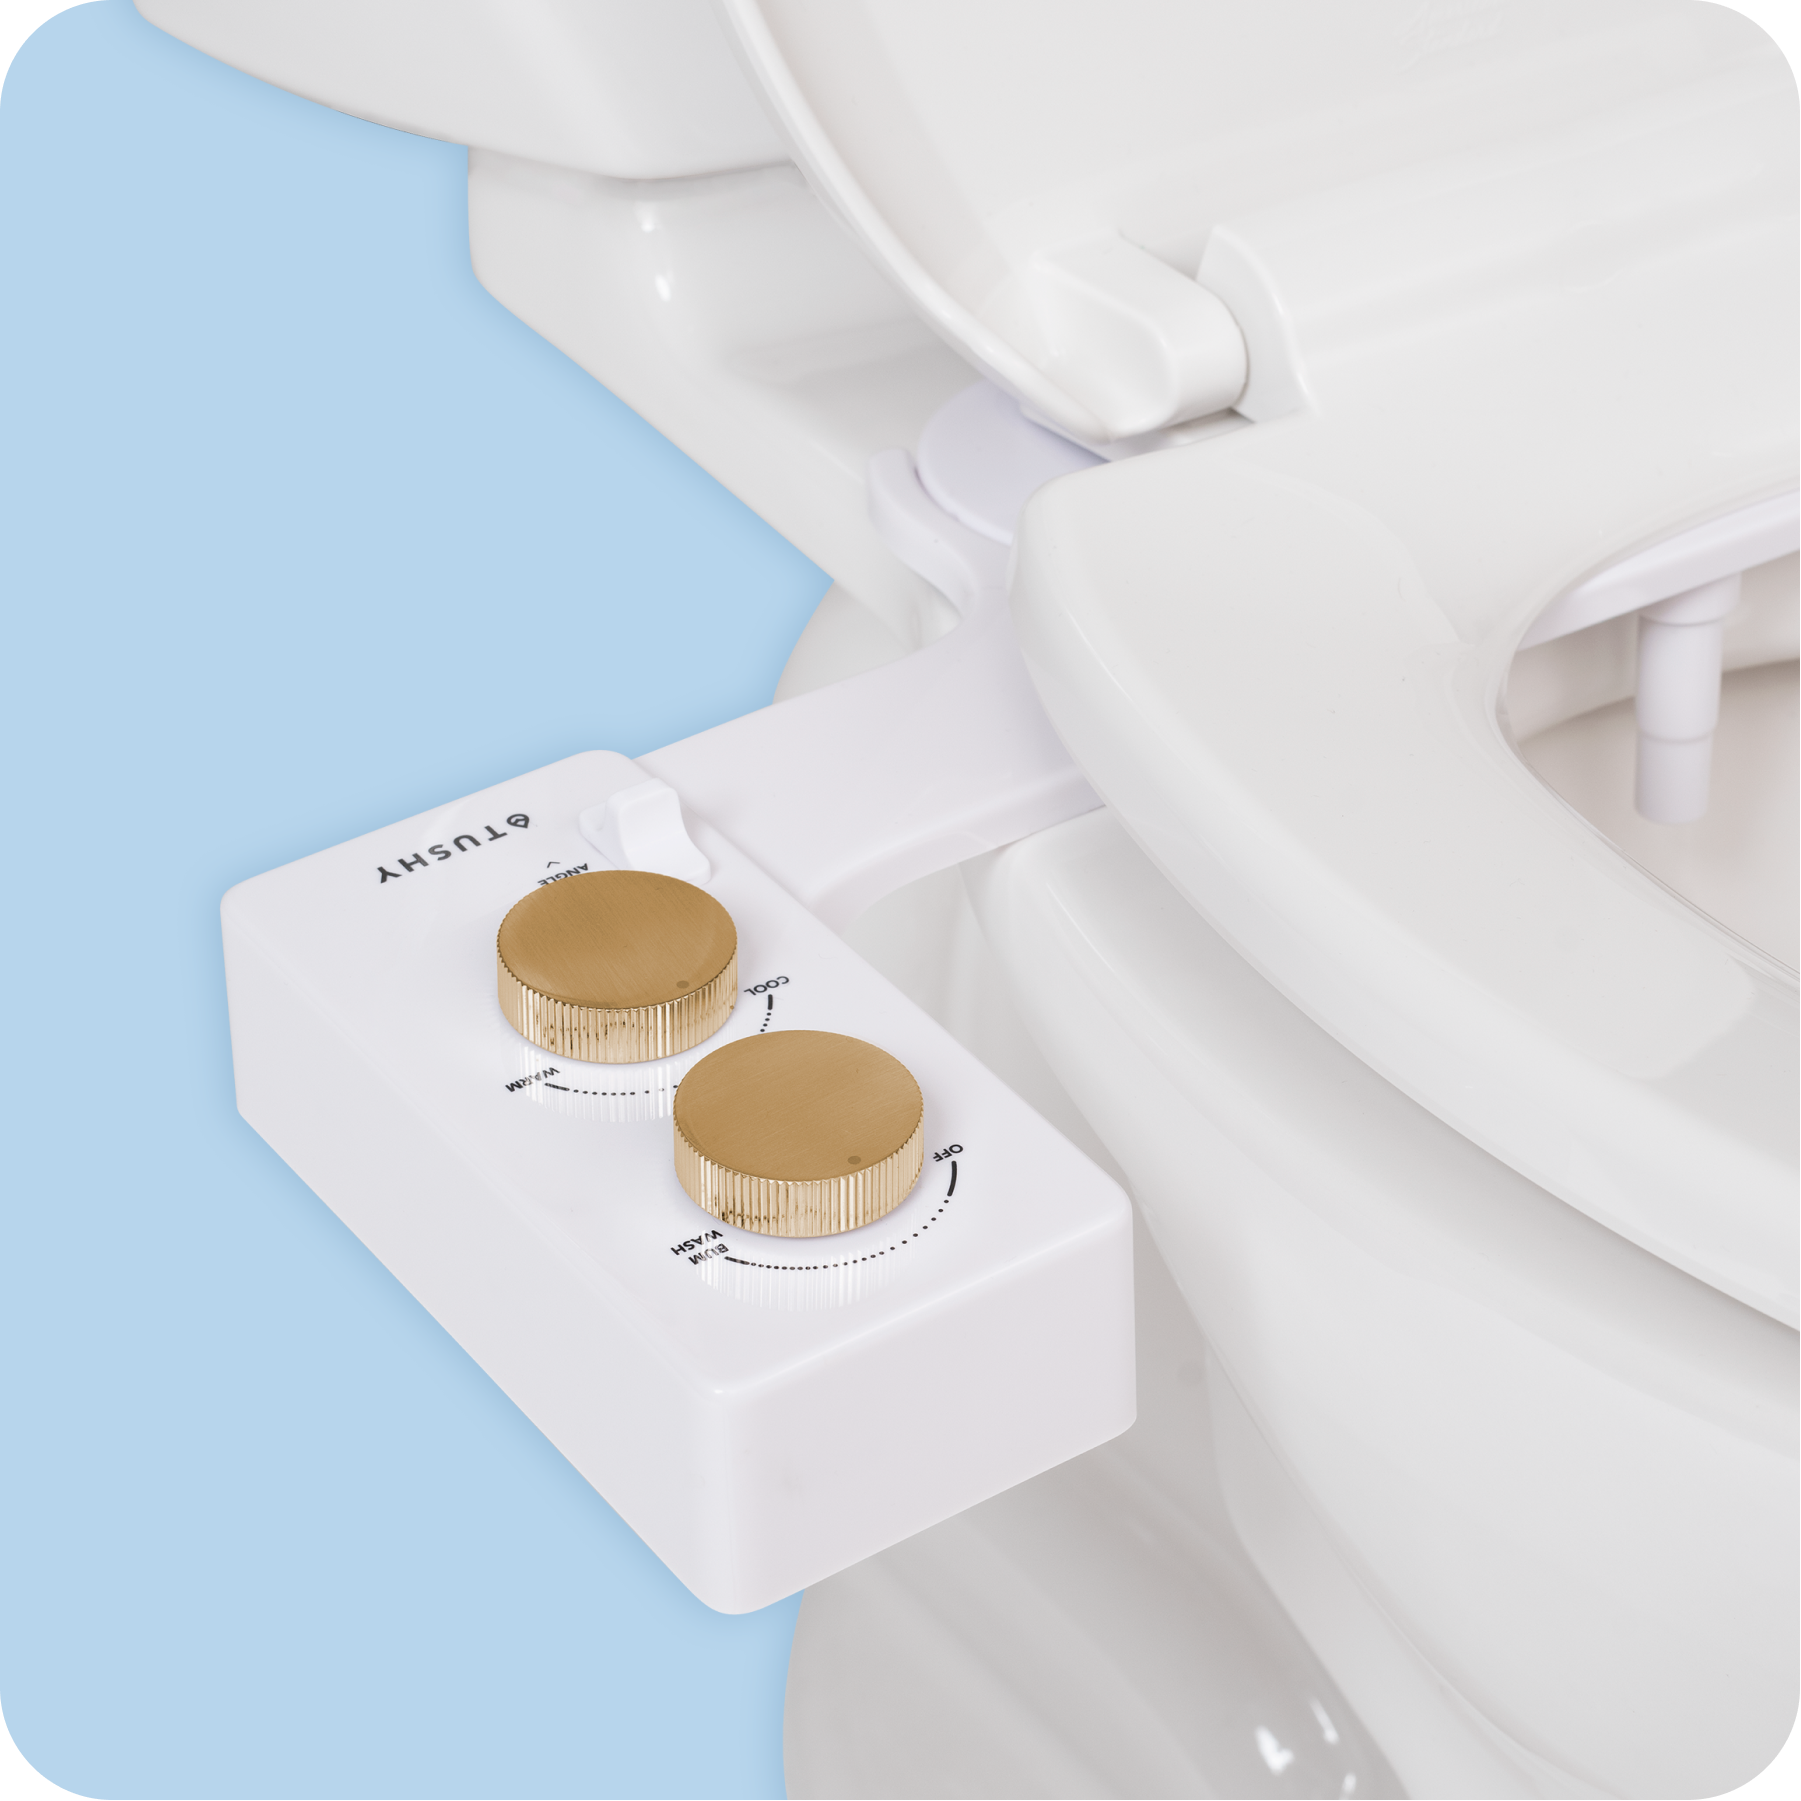 Tushy Spa 3.0 White / Gold-classic - a warm water bidet attachment by TUSHY White with Gold Knobs